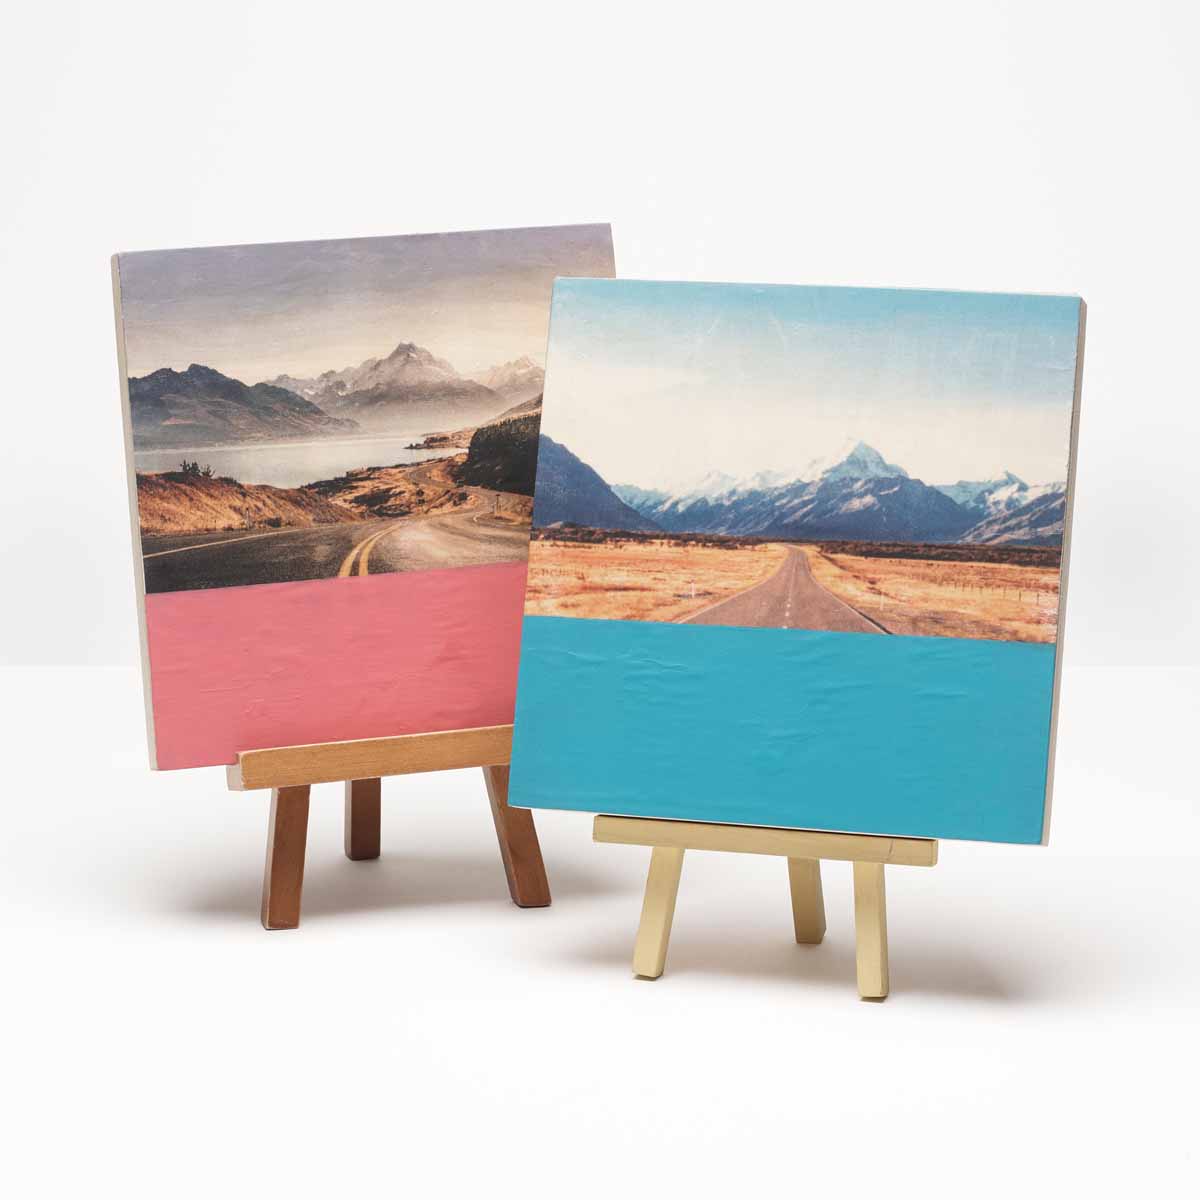 Photo Transfer Dipped Canvases